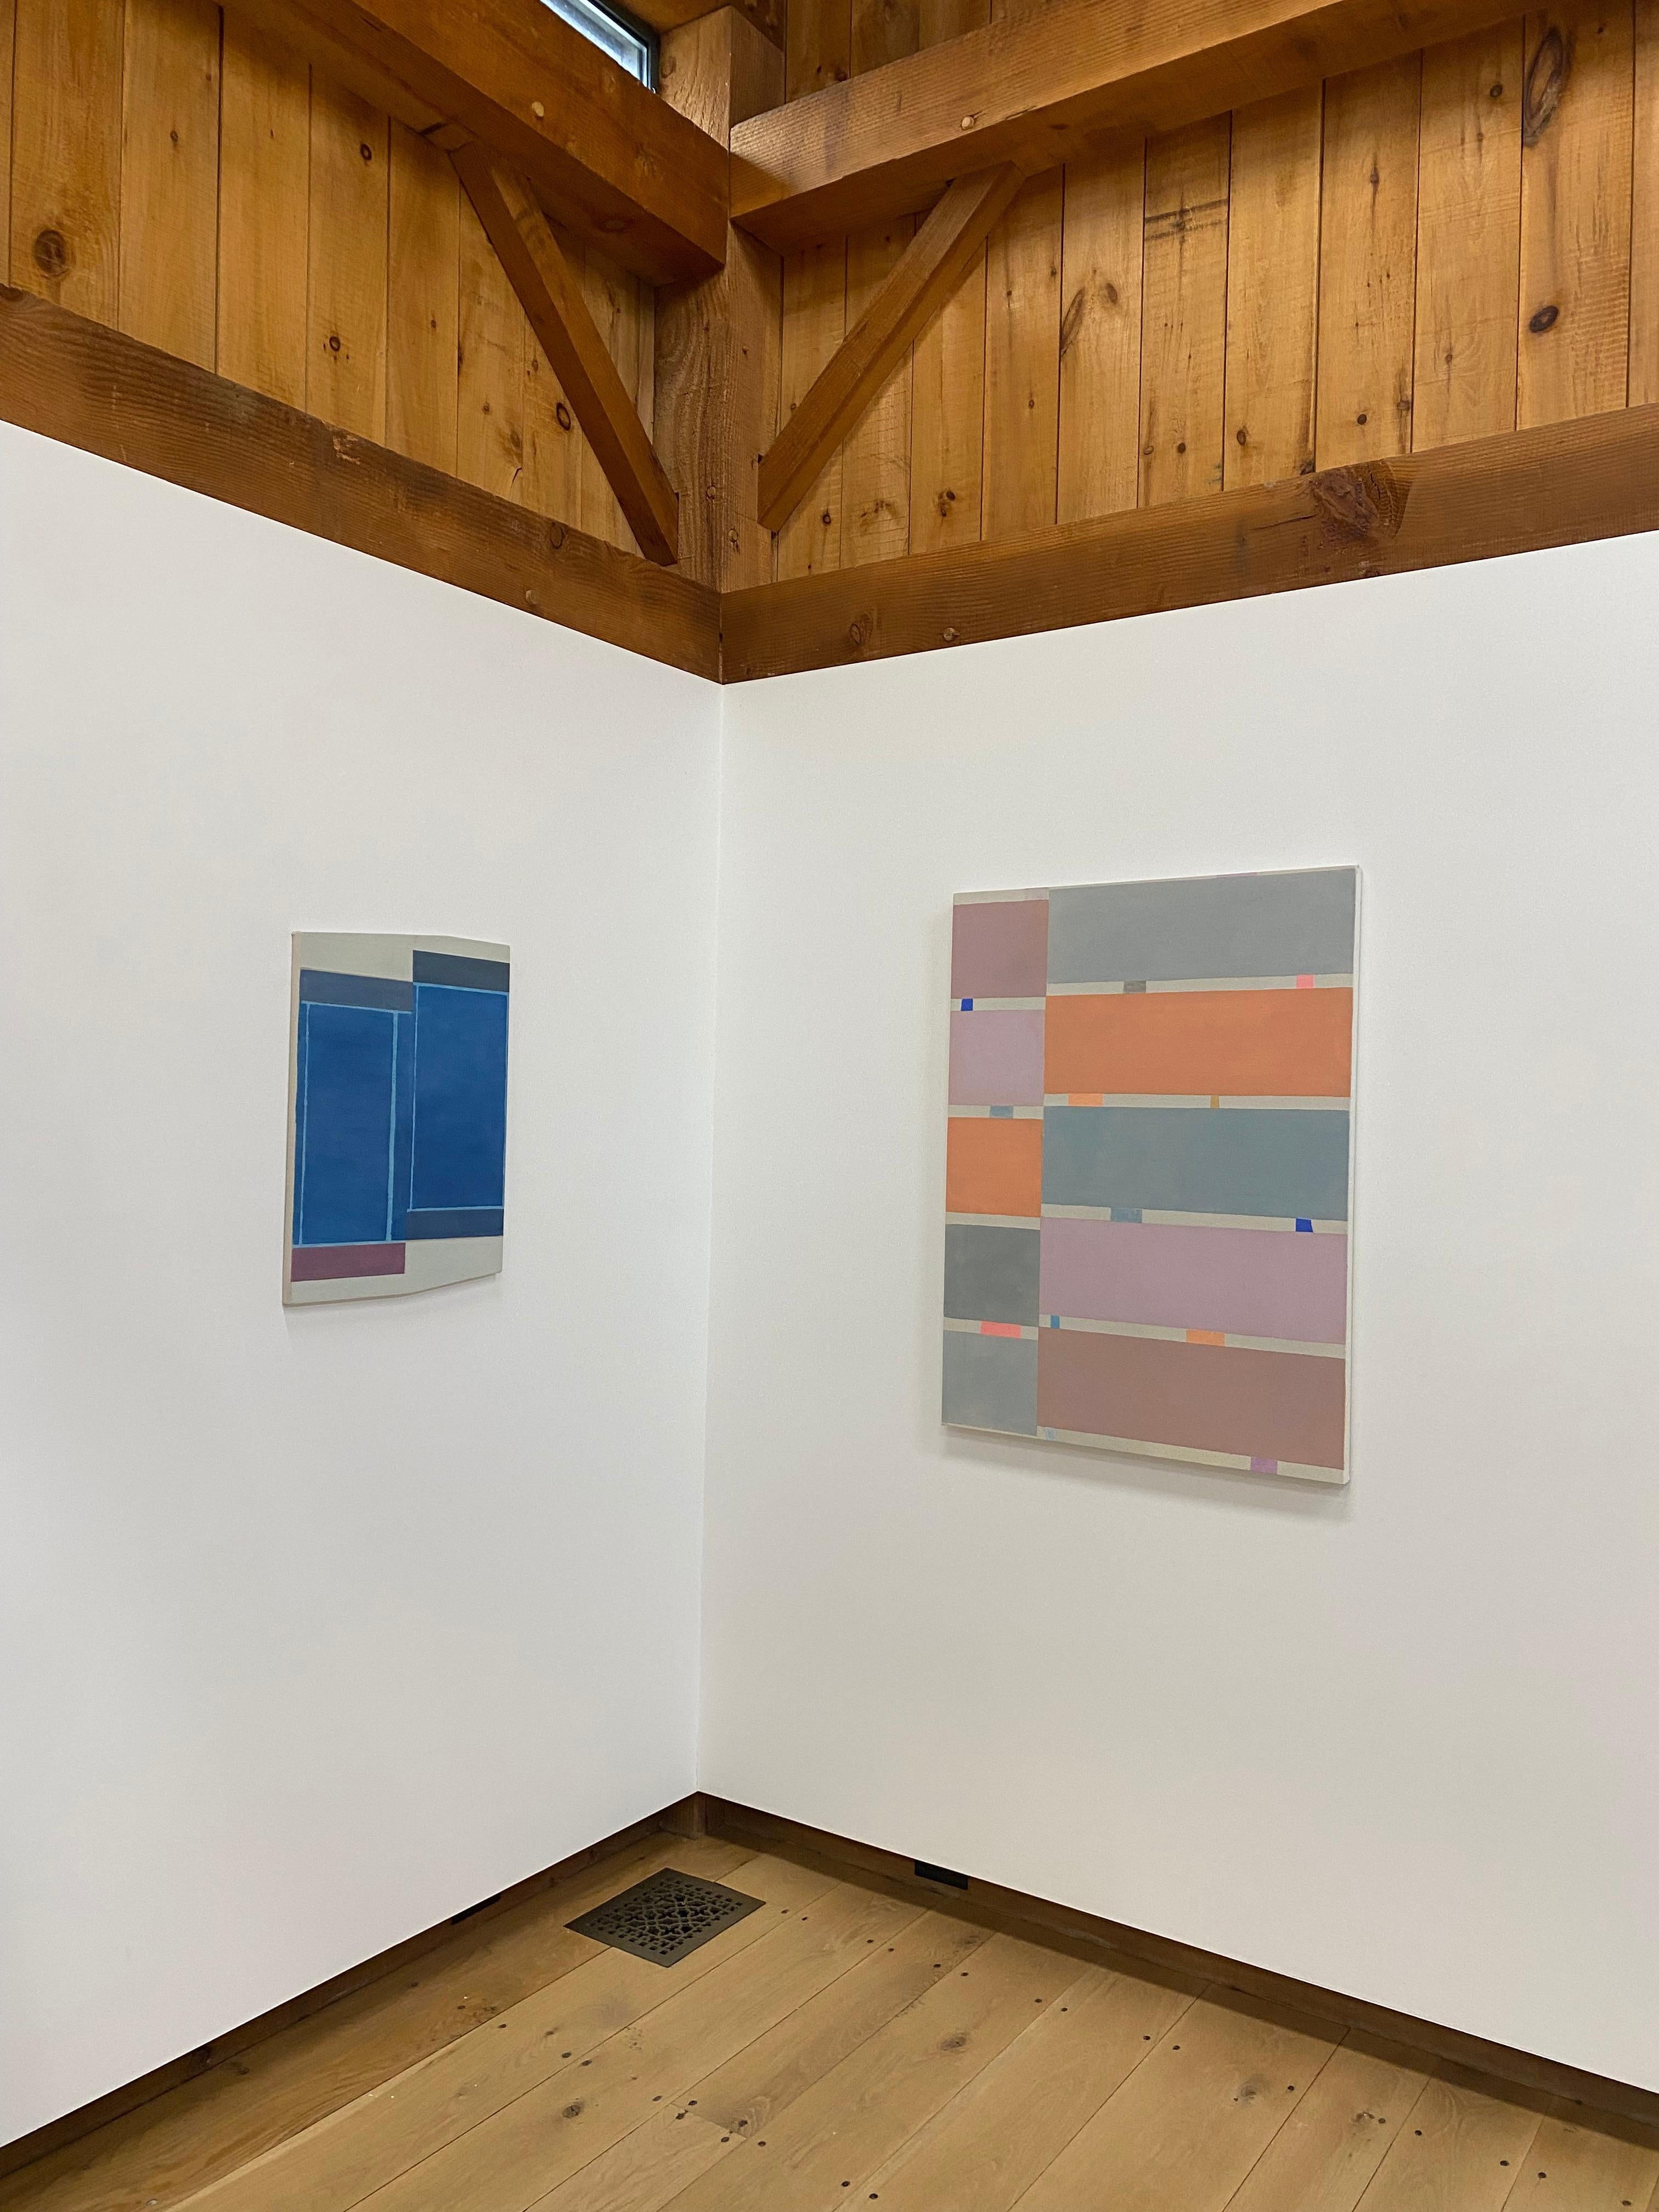 In this painting by Elizabeth Gourlay, carefully ordered horizontal blocks of color in salmon, peachy orange, lilac, mauve, gray and light purple are vibrant against thinner stripes in light gray punctuated by colorful sections in bright cobalt